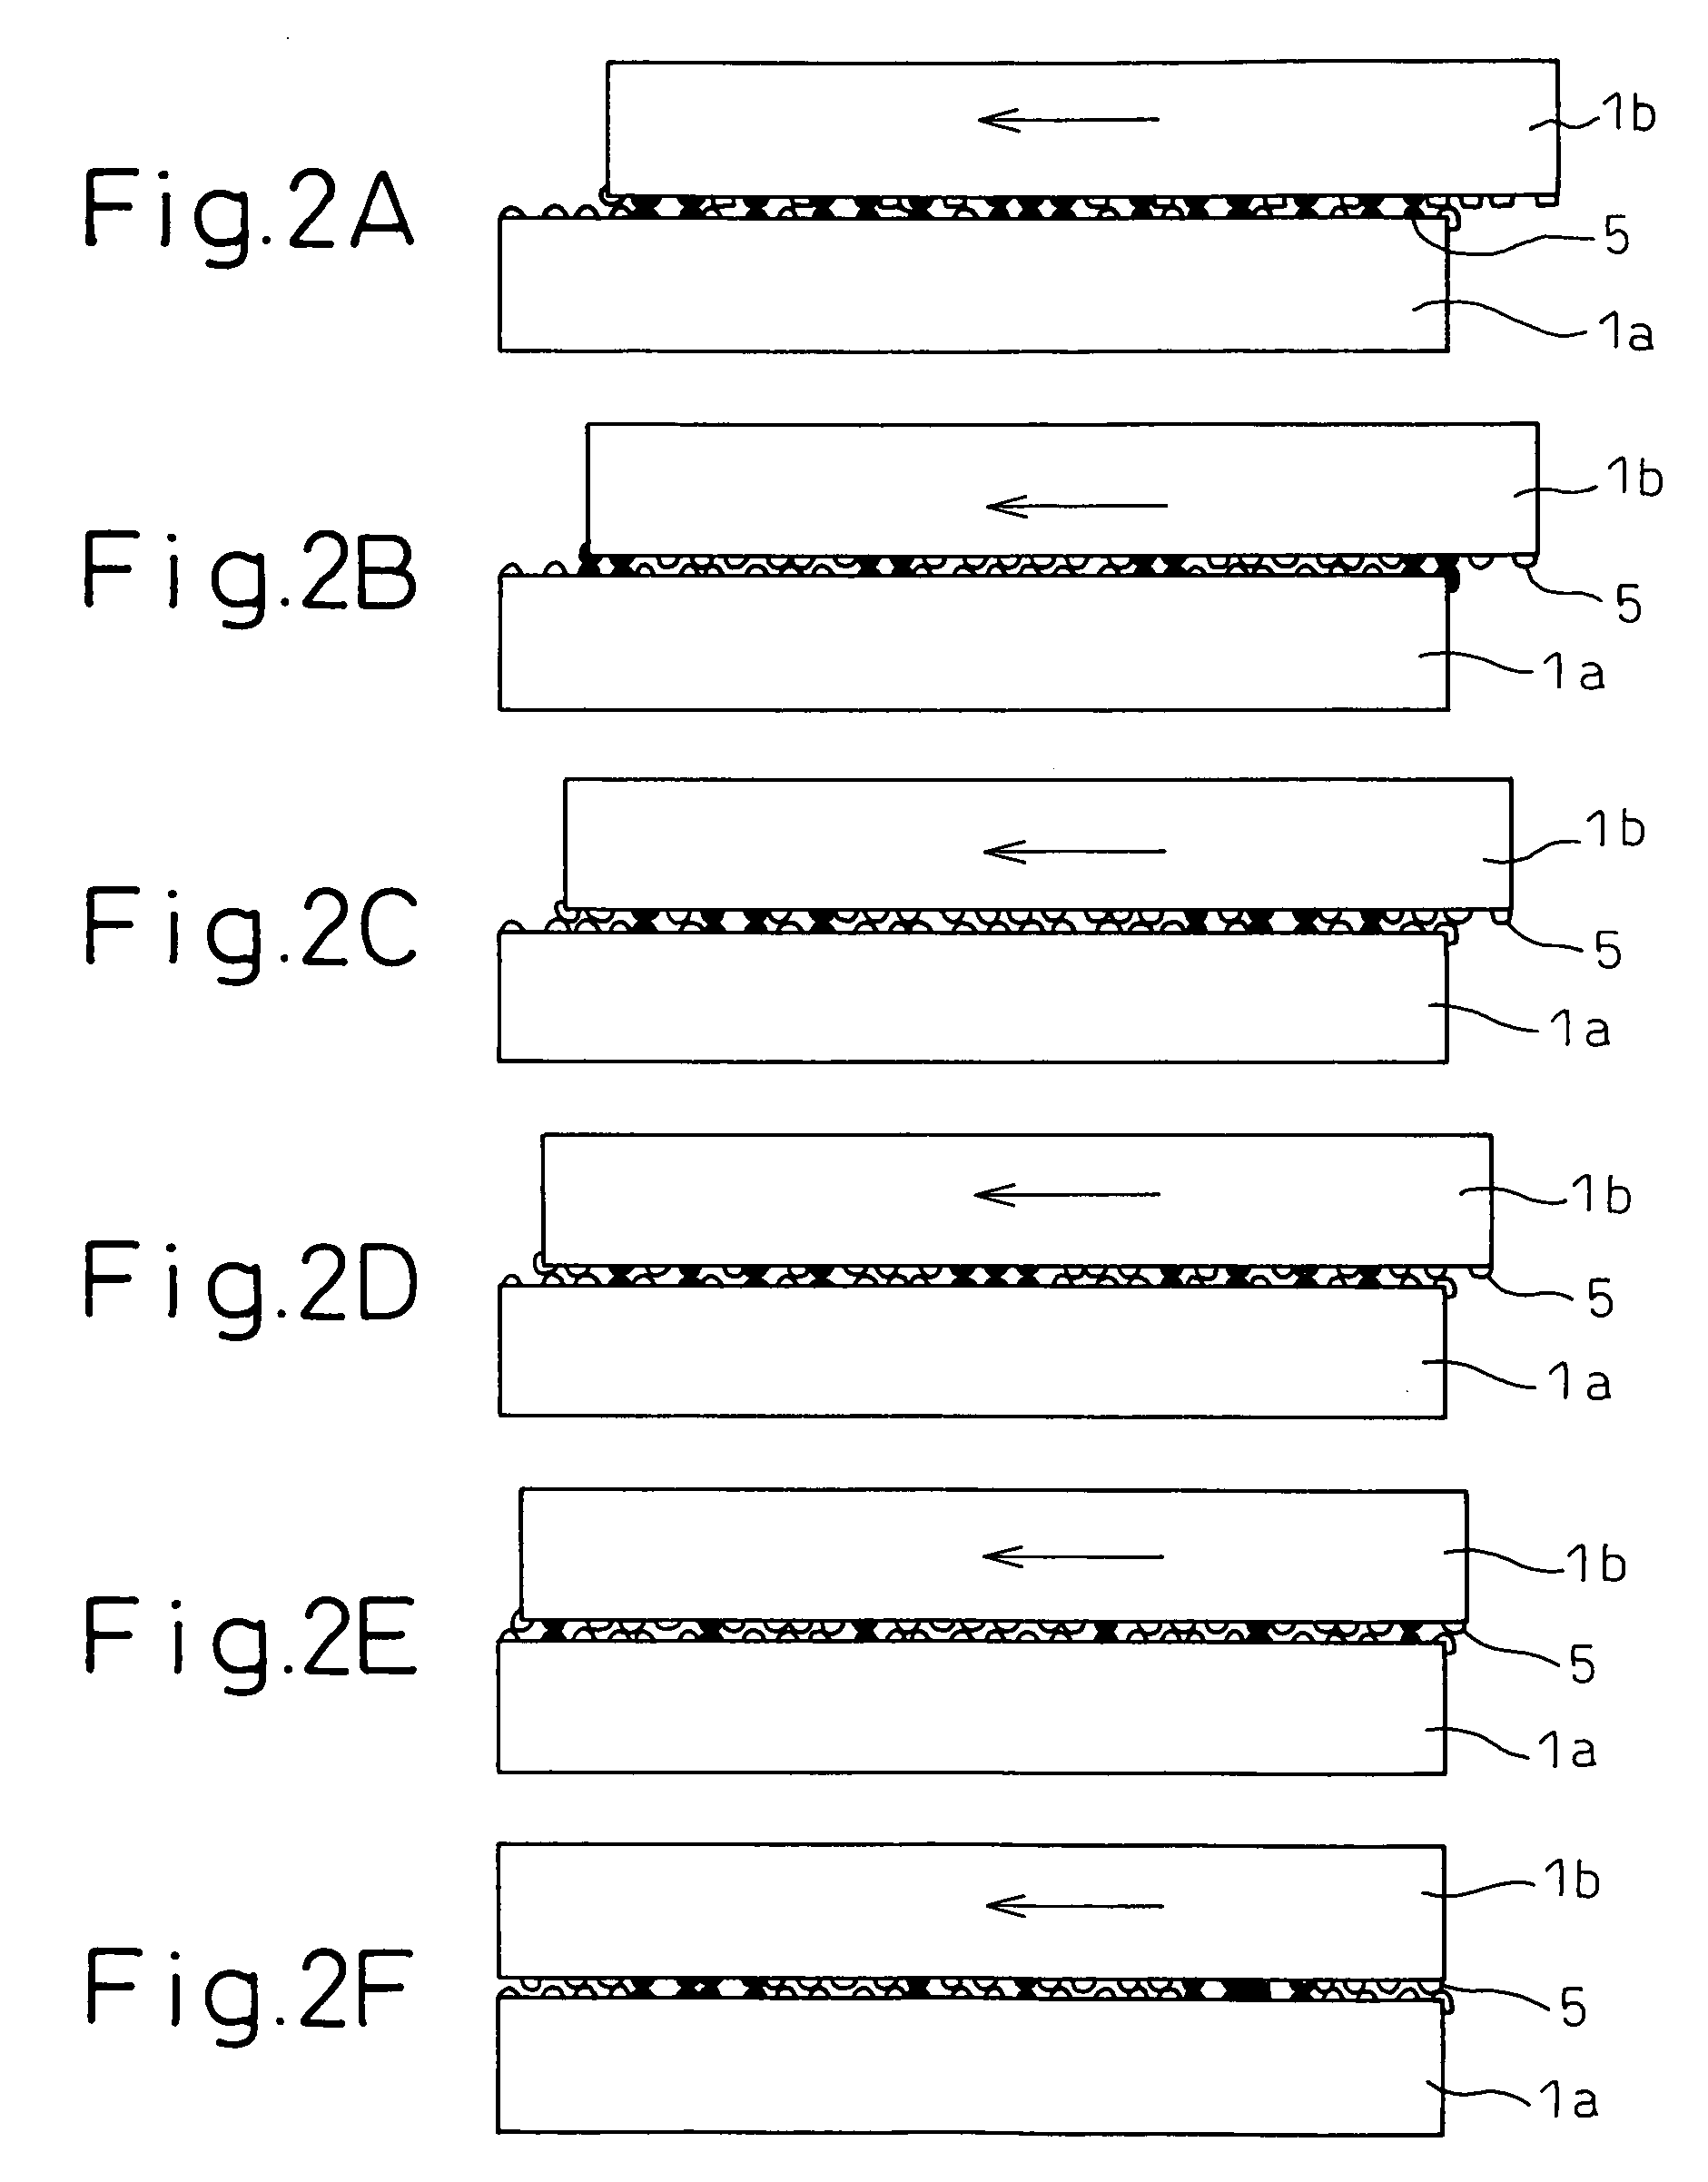 Electrostatic motor including projections providing a clearance between stator and slider electrode members